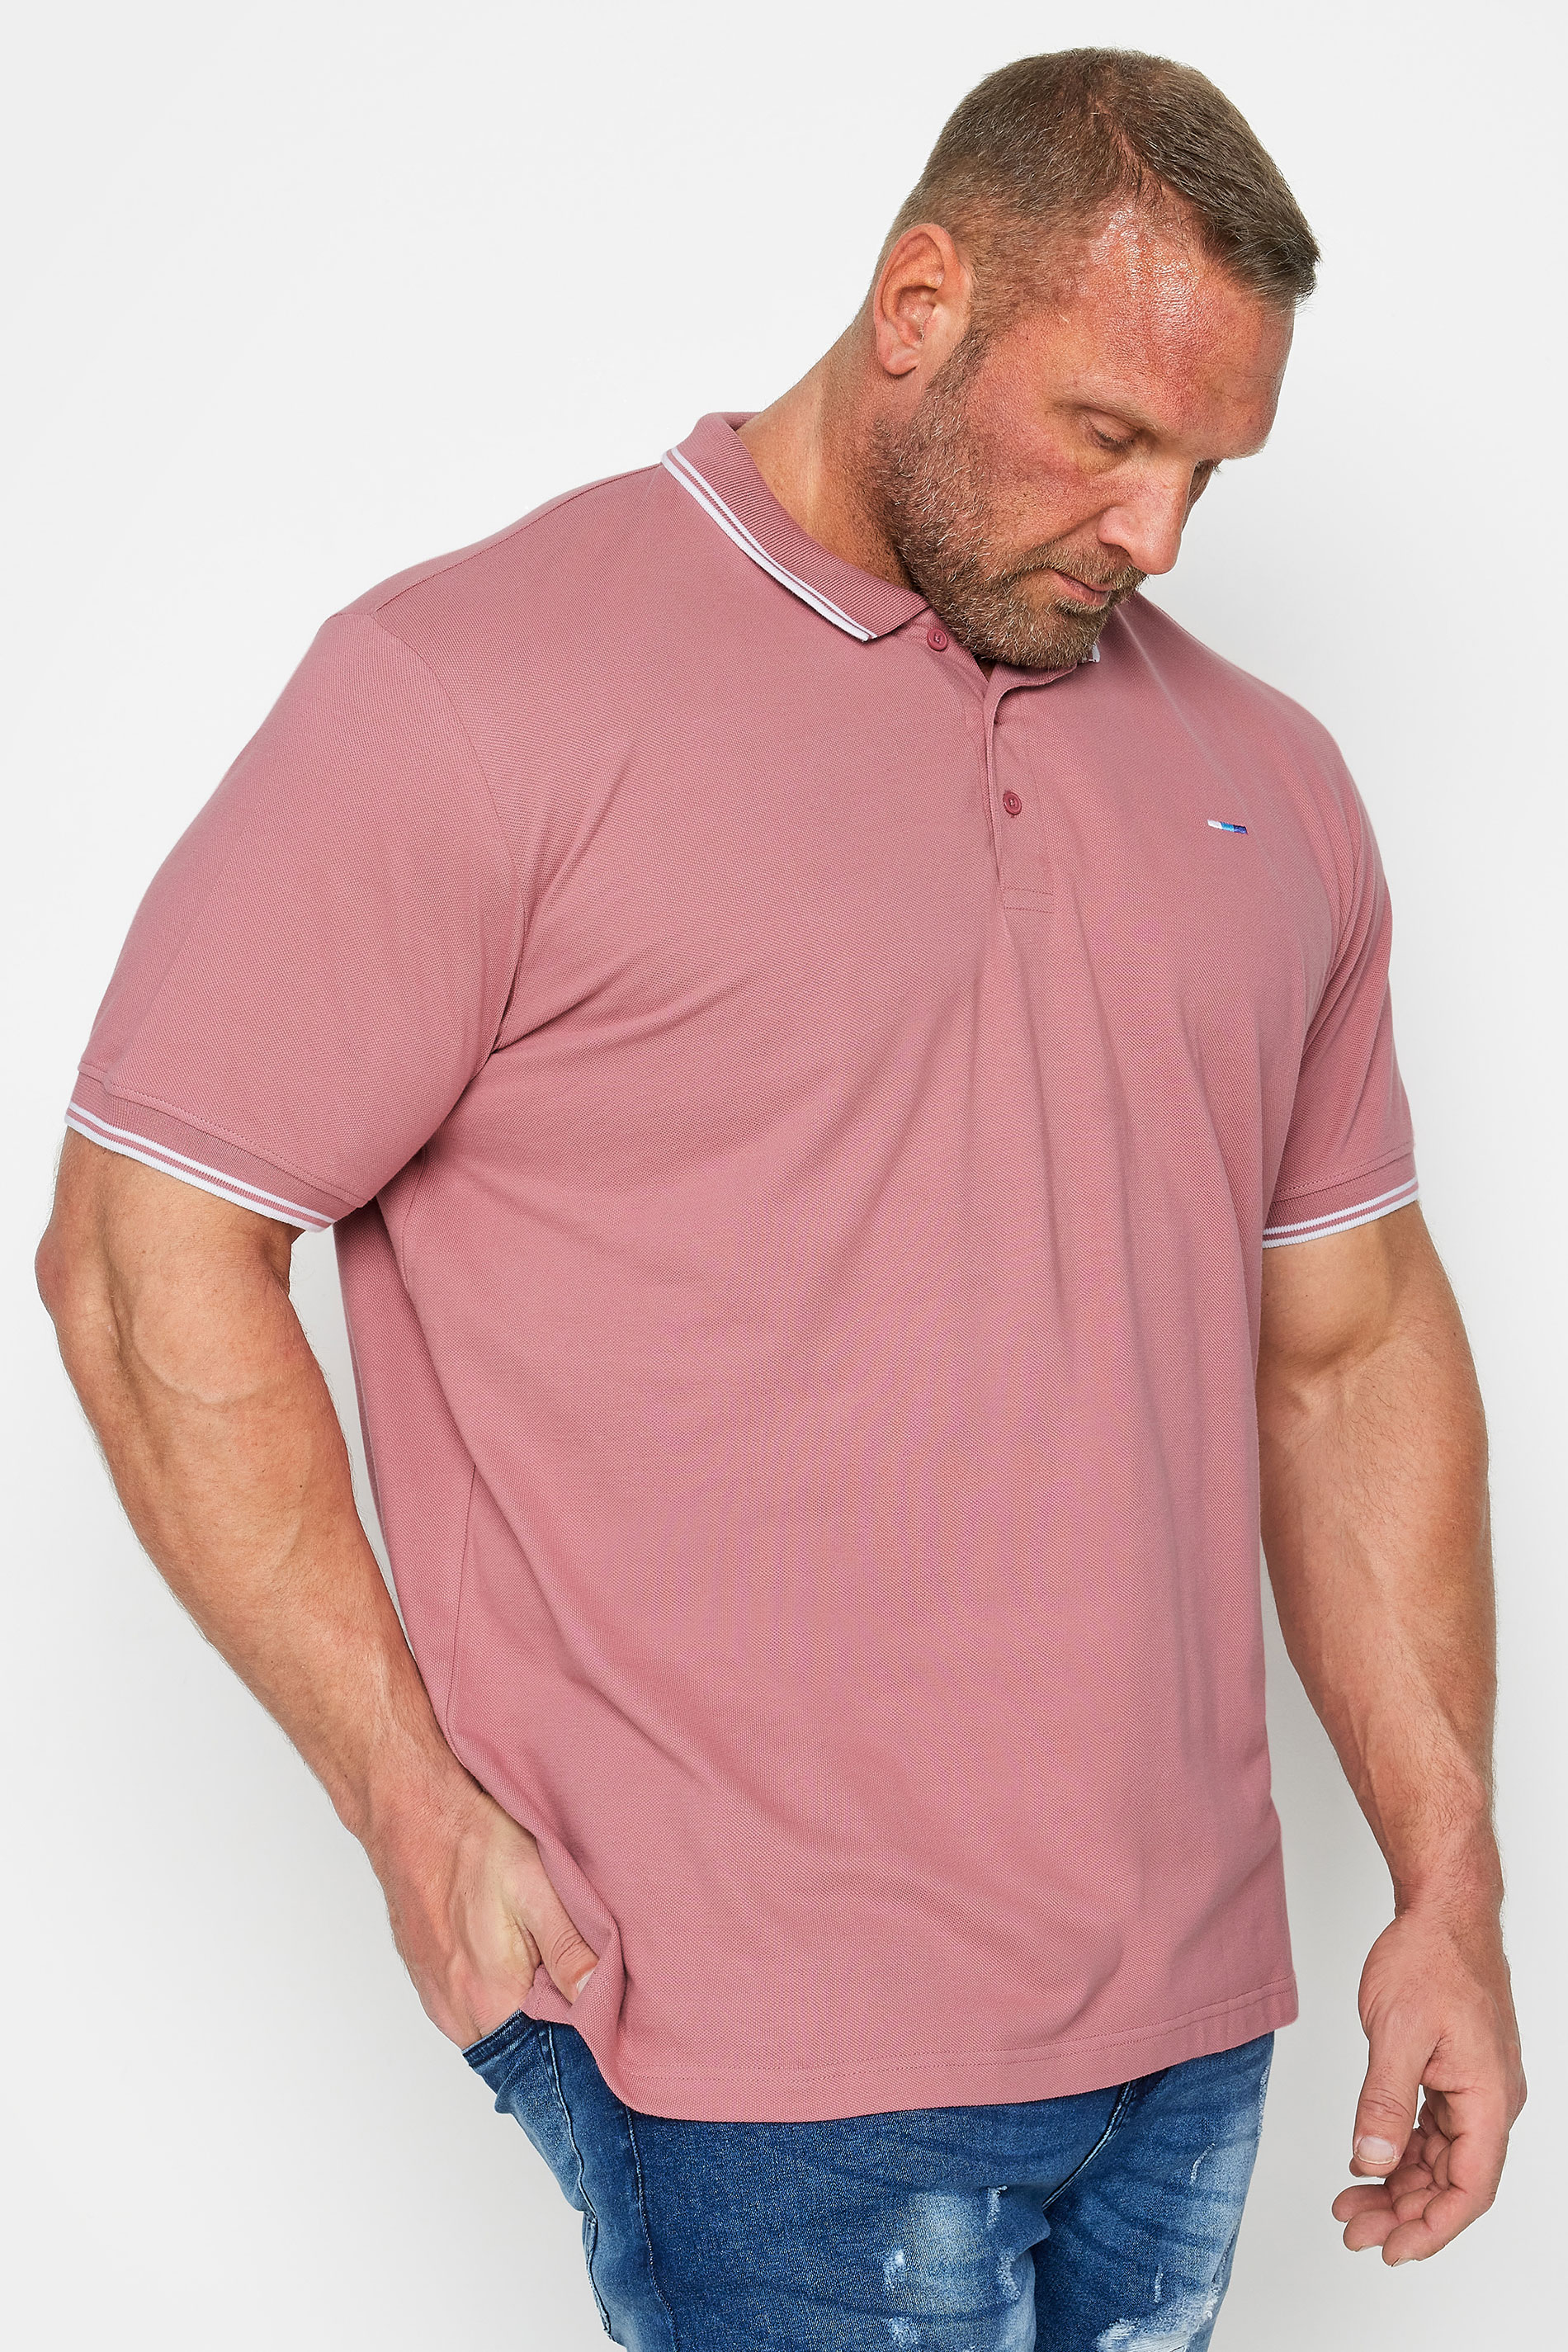 BadRhino Big & Tall 3 PACK Mineral Blue/Rose Pink/Violet Purple Tipped Polo Shirts | BadRhino 2